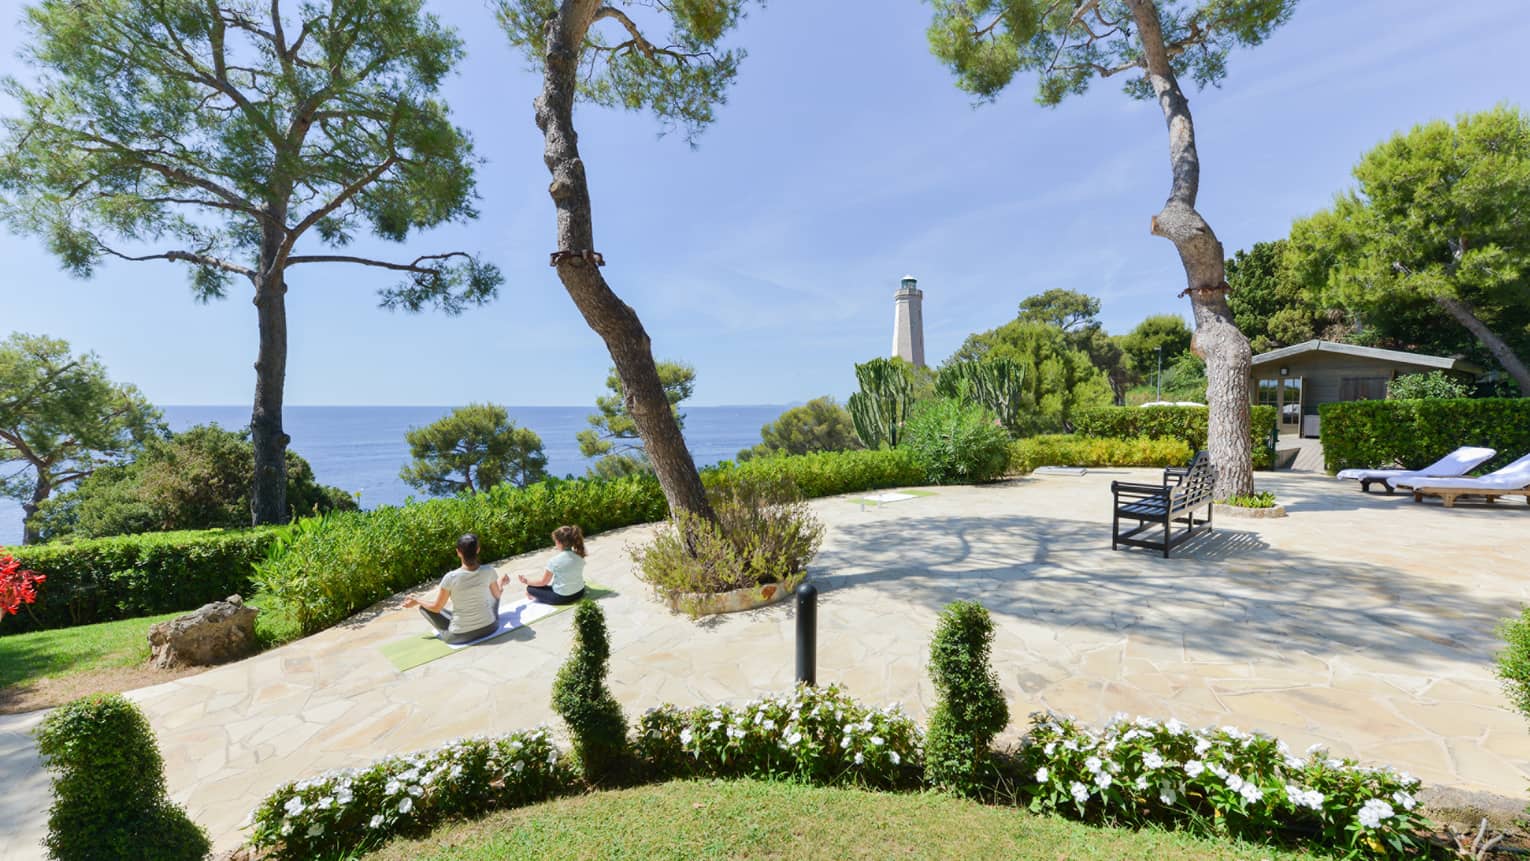 Rear view of two people in a seated yoga pose on curved patio with lush greenery, sea and lighthouse view